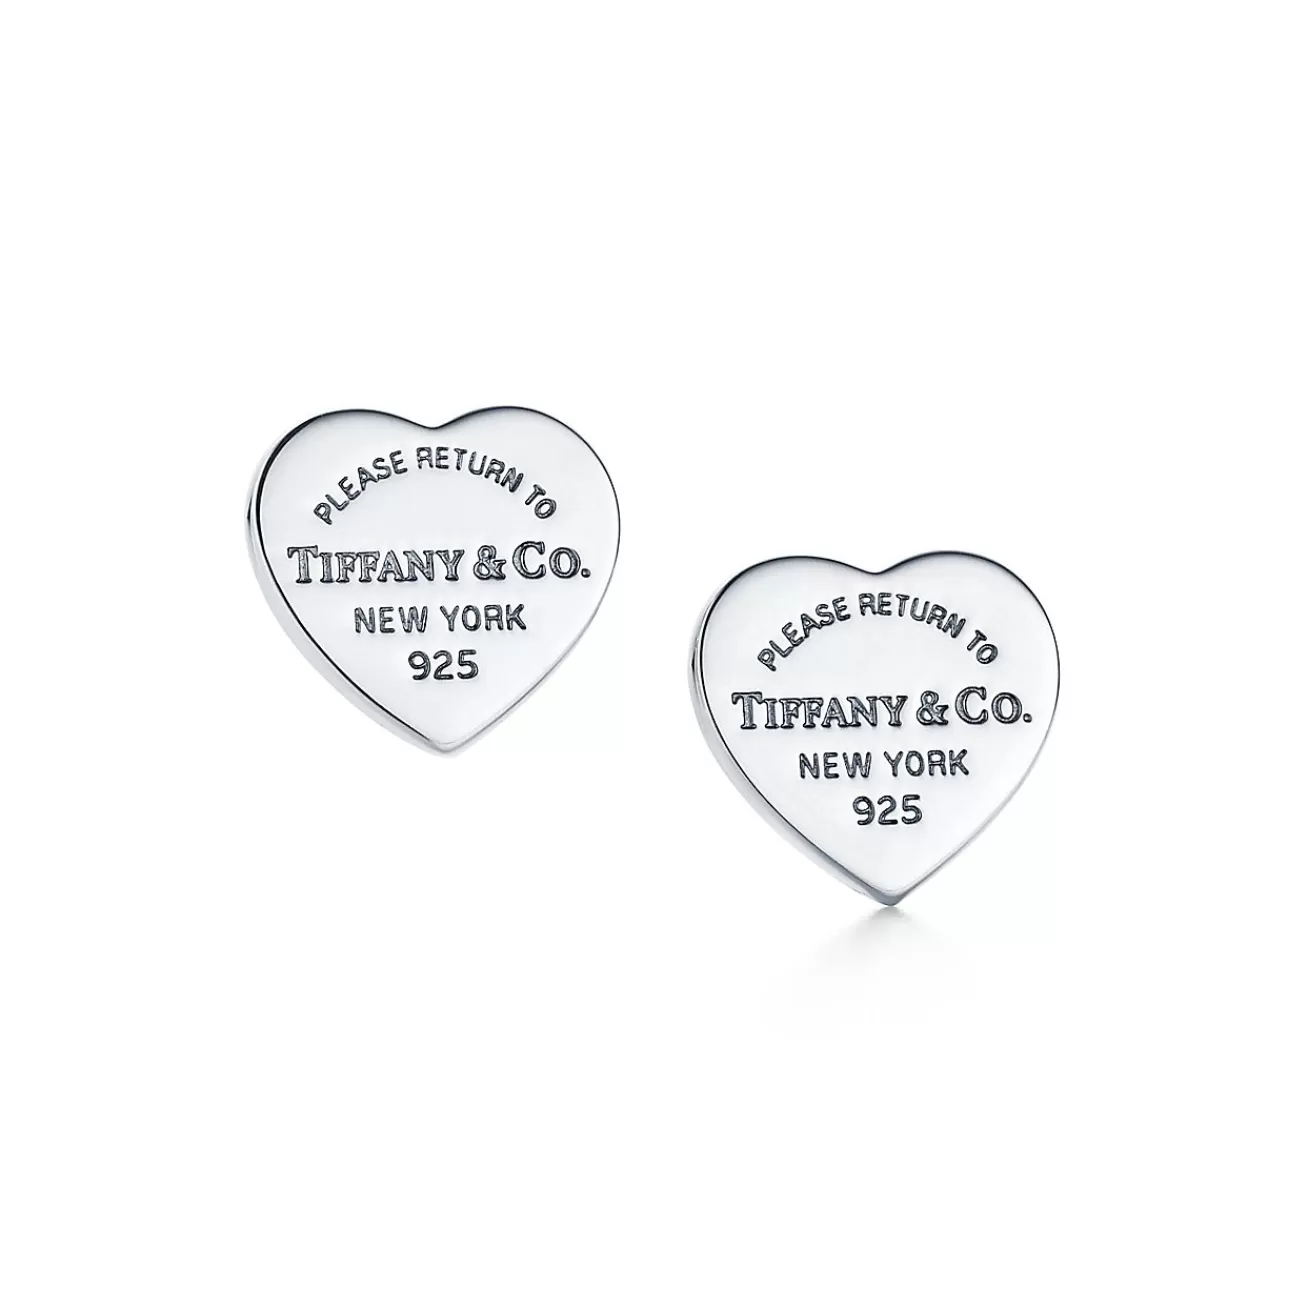 Tiffany & Co. Return to Tiffany® Heart Tag Stud Earrings in Silver, Mini | ^ Earrings | Gifts for Her